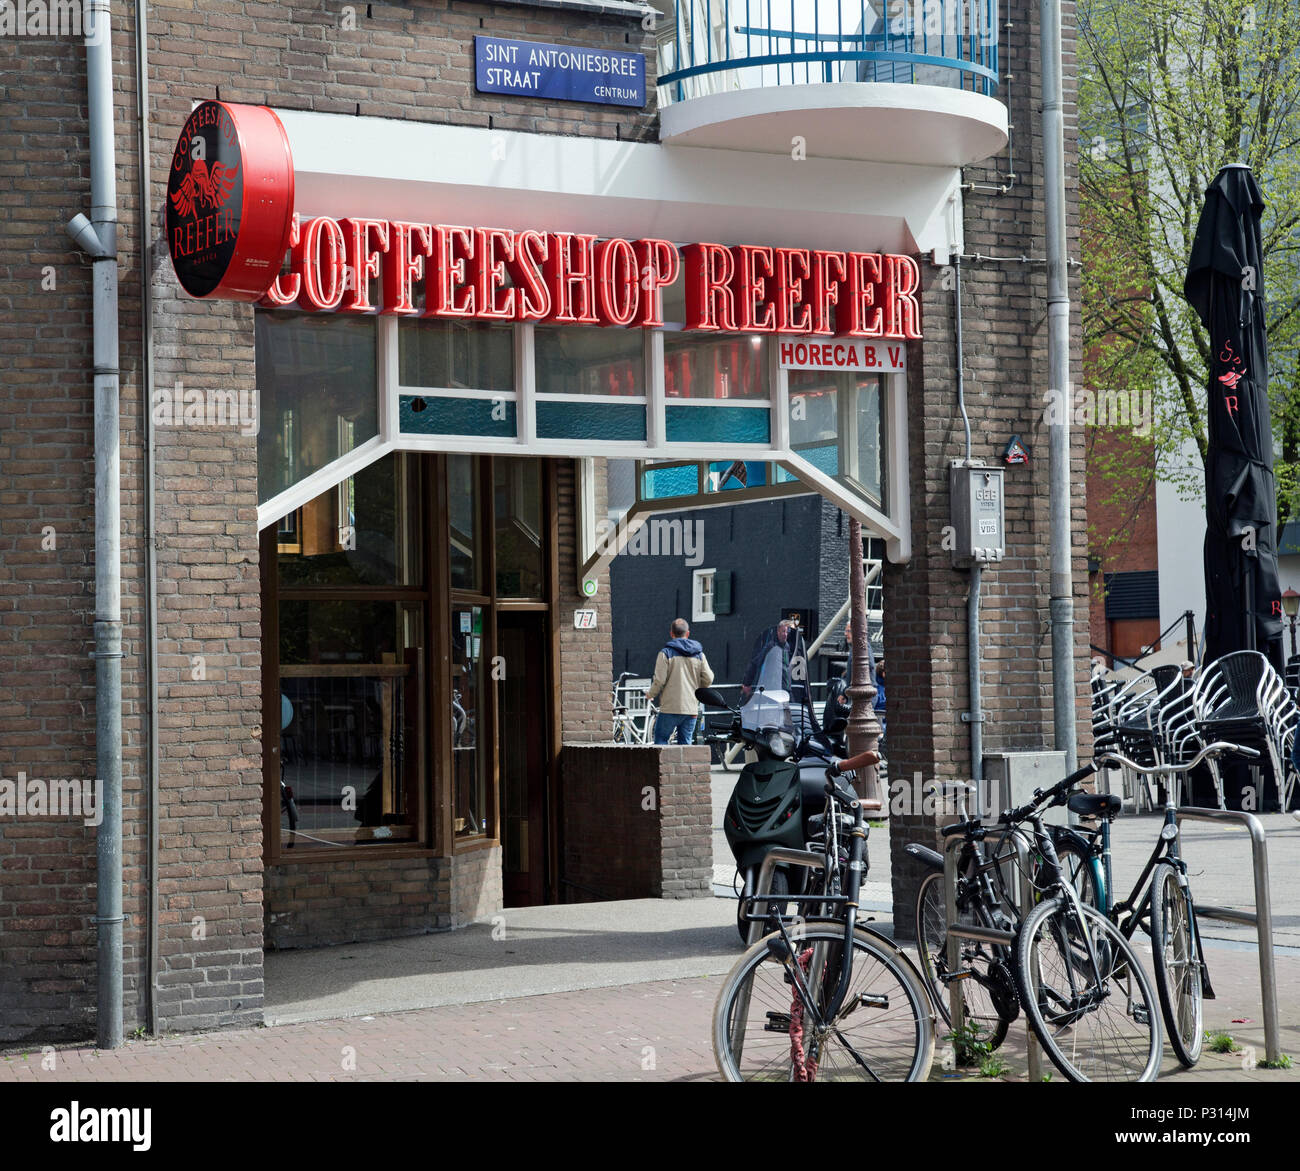 Amsterdam, Netherlands, June 2018, A coffee shop with the name 'Coffeeshop reefer' Stock Photo